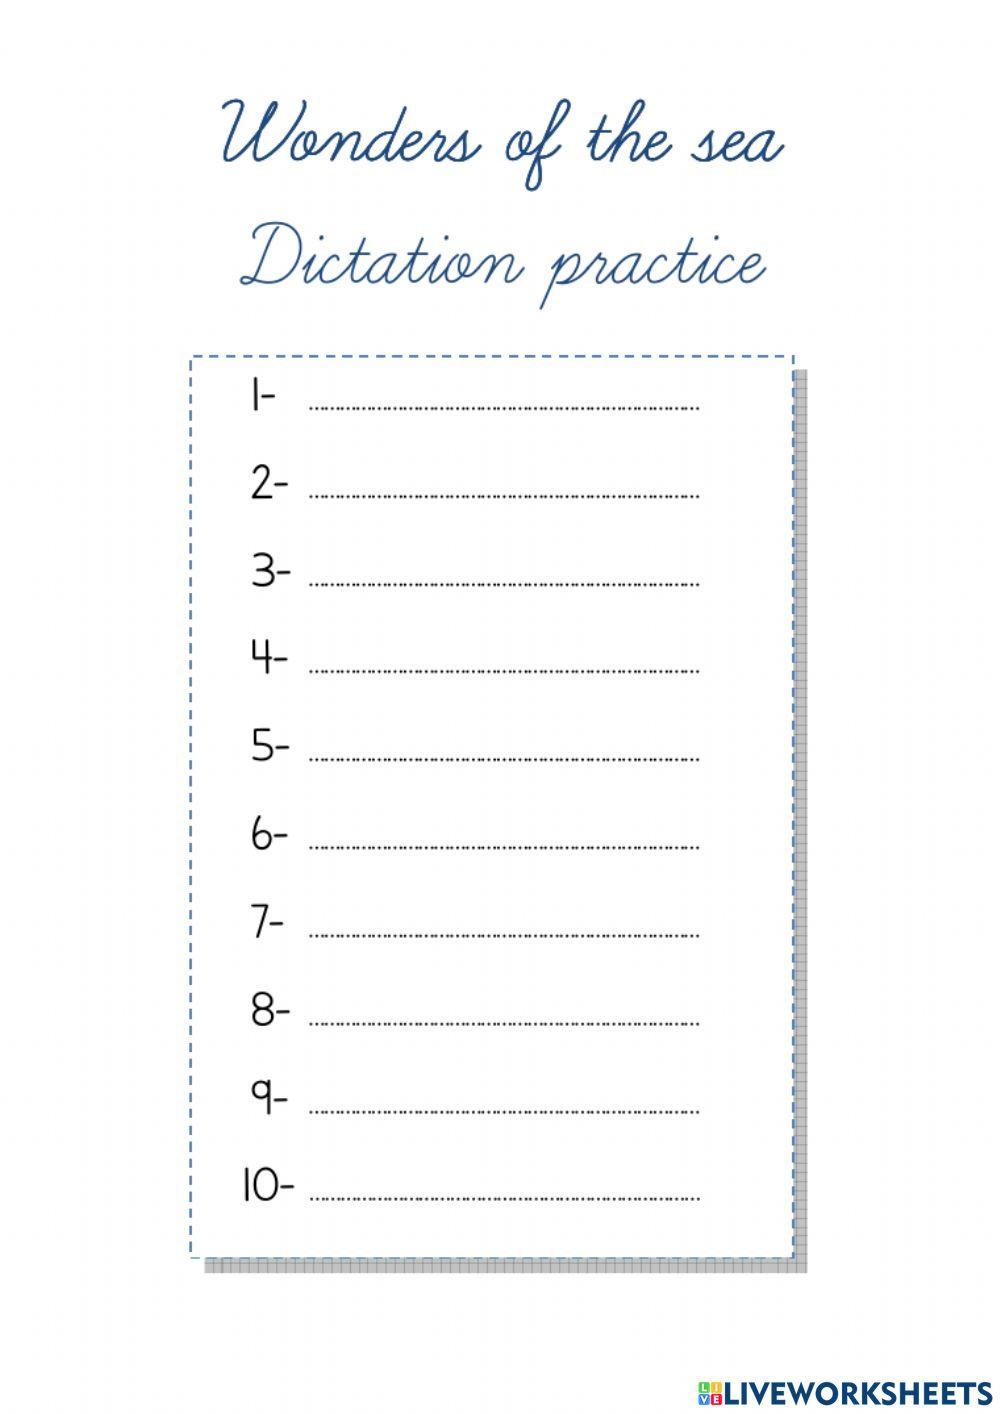 Wonders of the sea: dictation practice